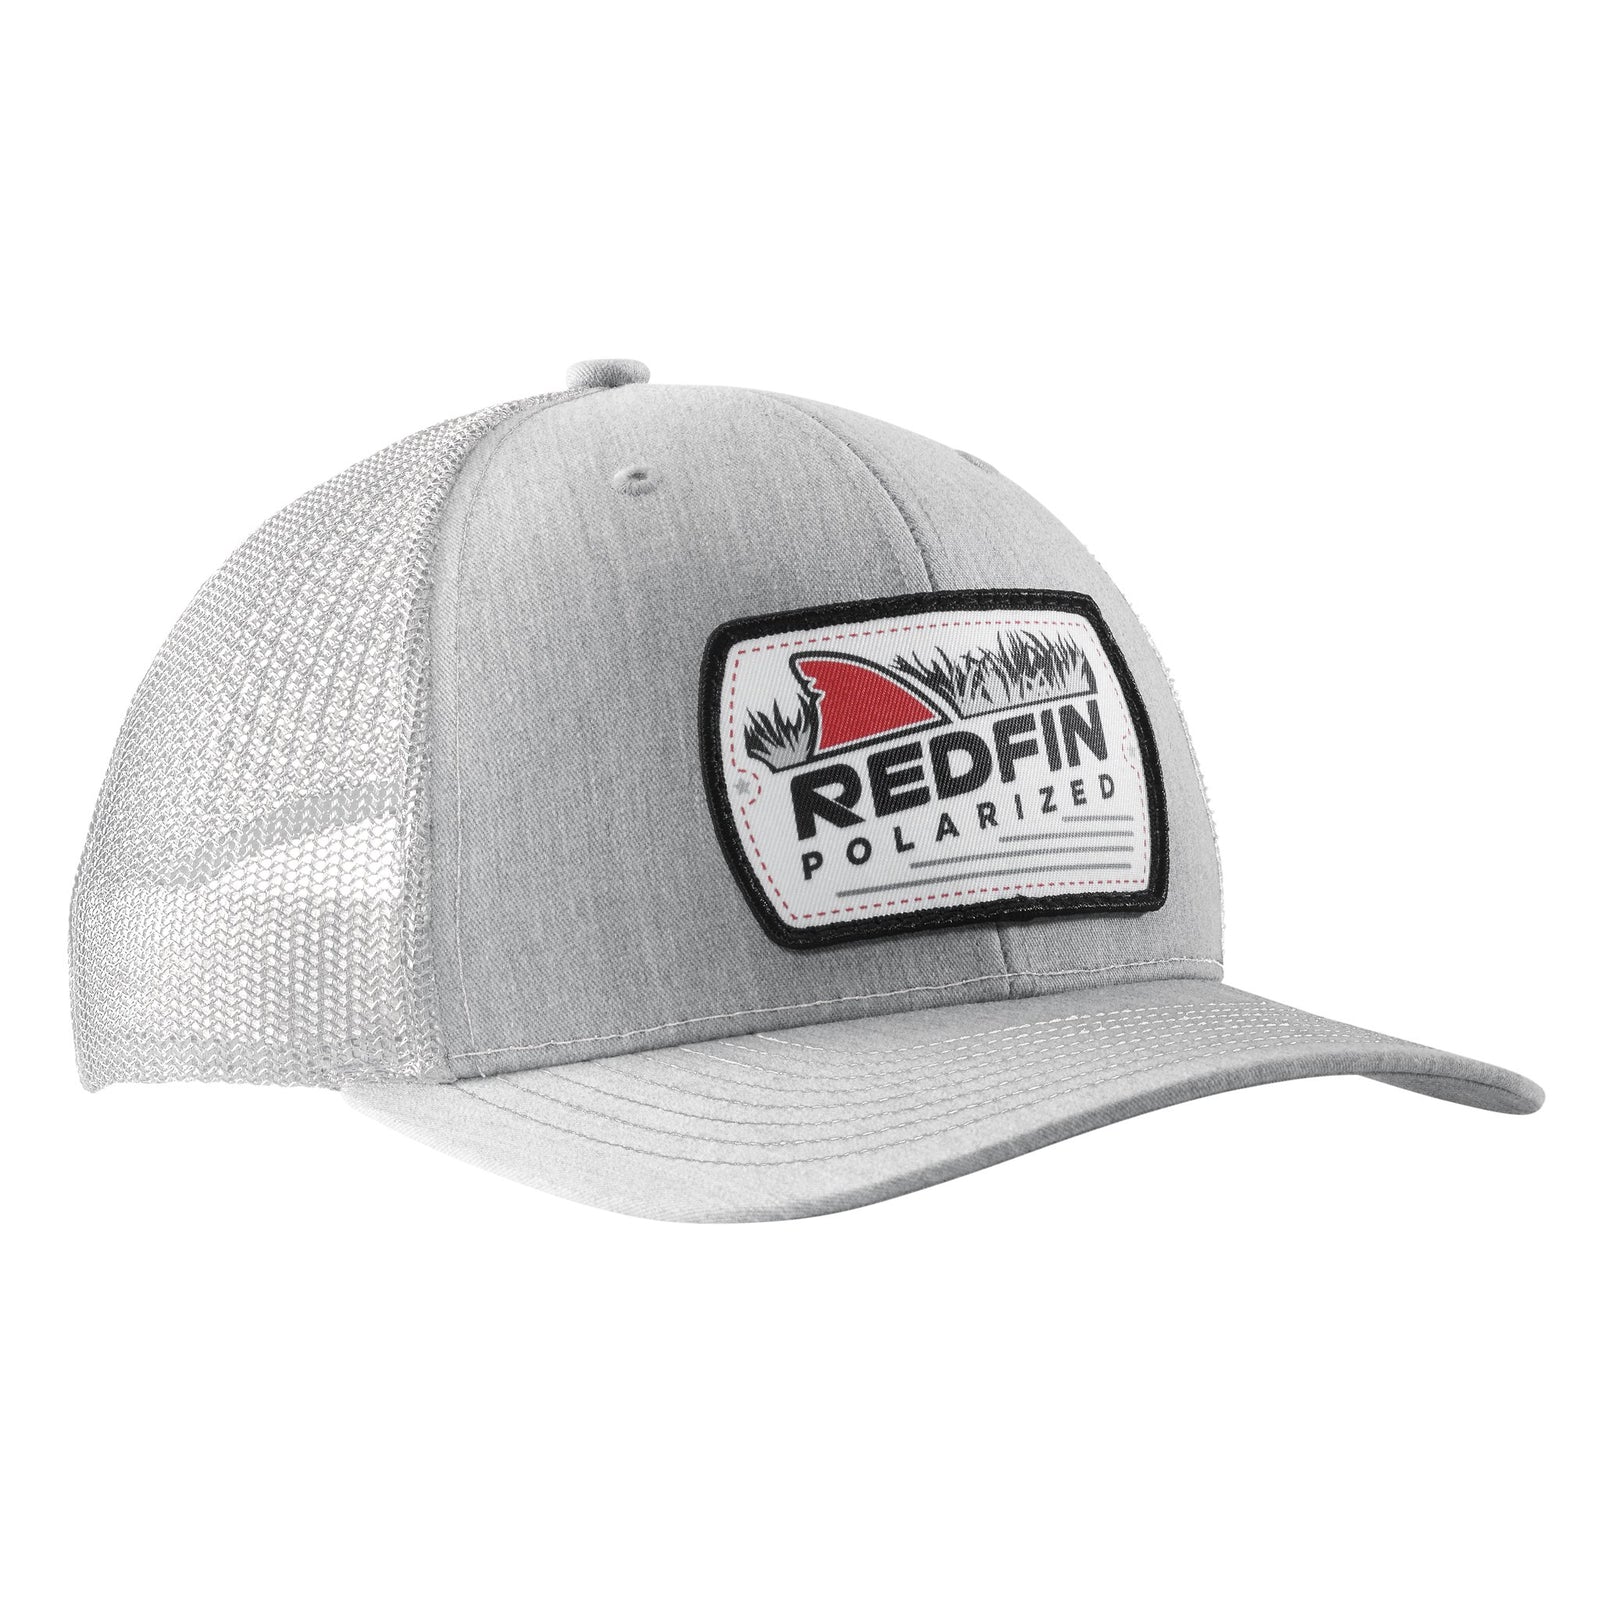 RedFin Pro Select Patch Hat - RedFin Polarized